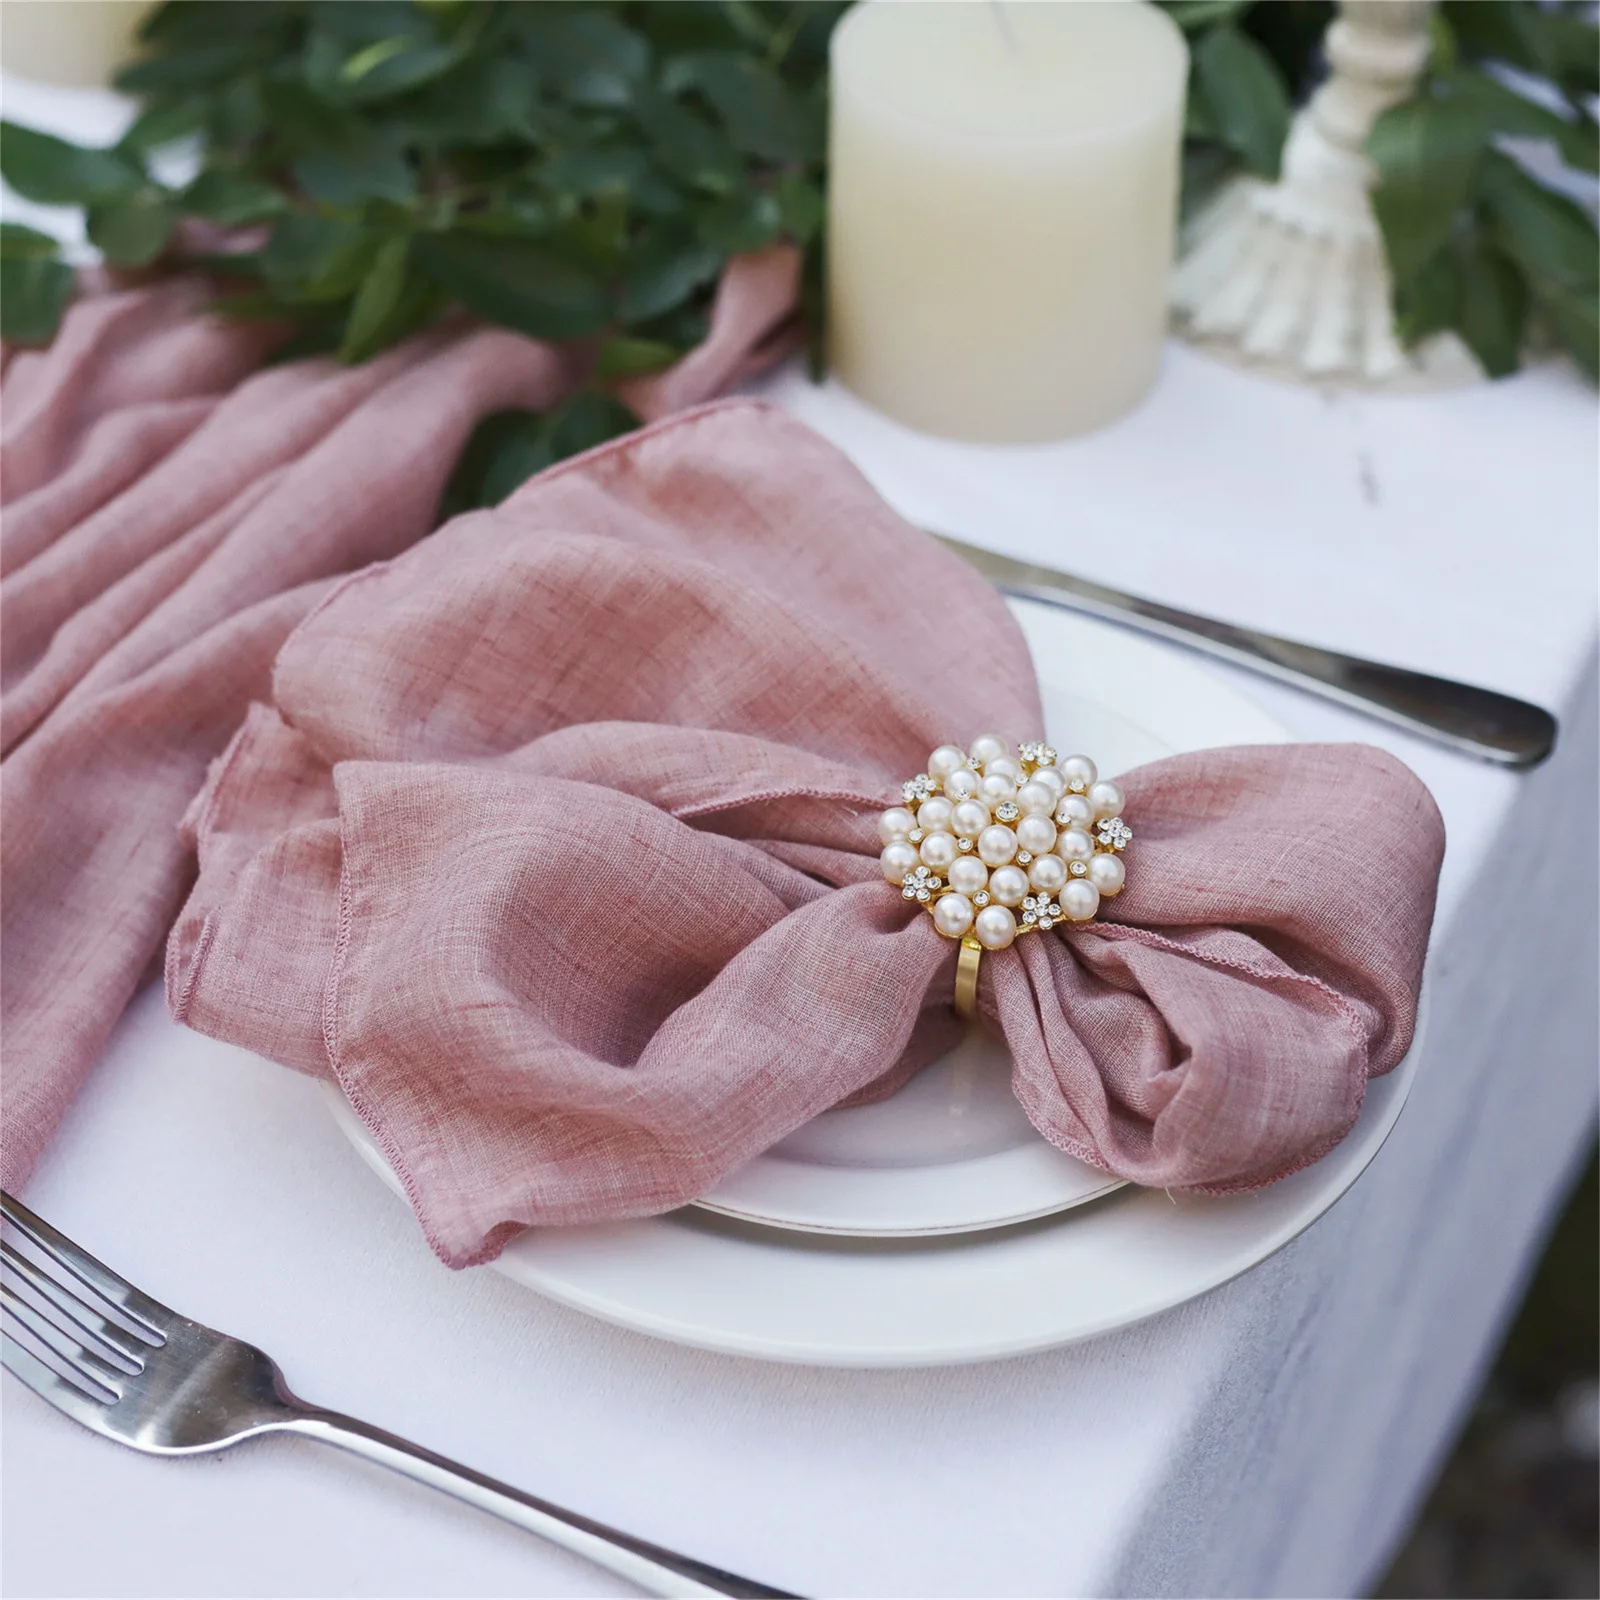 

6Pcs Table Cloth Napkins Country Party Wedding Decor Home Towel Linens Cutlery Cloth Kitchen Dining Table Napkin Clothes Decor